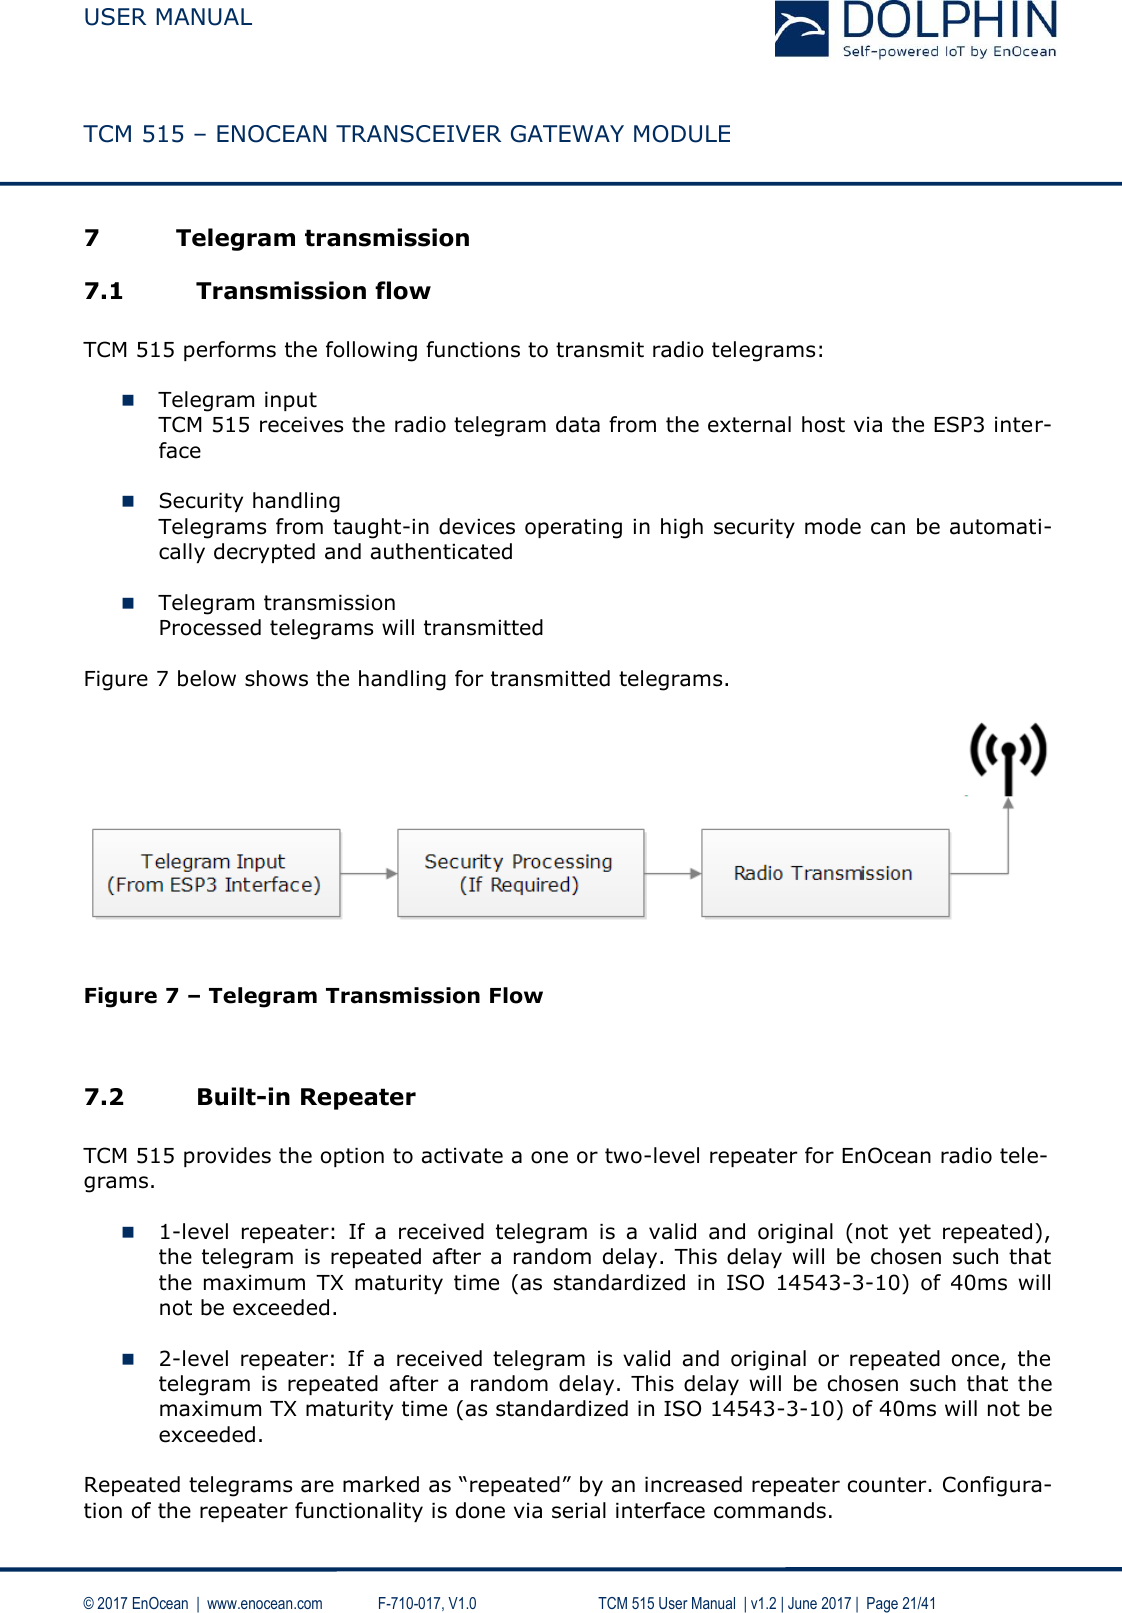  USER MANUAL    TCM 515 – ENOCEAN TRANSCEIVER GATEWAY MODULE  © 2017 EnOcean  |  www.enocean.com   F-710-017, V1.0        TCM 515 User Manual  | v1.2 | June 2017 |  Page 21/41  7 Telegram transmission 7.1 Transmission flow  TCM 515 performs the following functions to transmit radio telegrams:   Telegram input TCM 515 receives the radio telegram data from the external host via the ESP3 inter-face   Security handling Telegrams from taught-in devices operating in high security mode can be automati-cally decrypted and authenticated   Telegram transmission Processed telegrams will transmitted  Figure 7 below shows the handling for transmitted telegrams.     Figure 7 – Telegram Transmission Flow   7.2 Built-in Repeater  TCM 515 provides the option to activate a one or two-level repeater for EnOcean radio tele-grams.   1-level  repeater:  If  a  received telegram  is  a  valid  and  original  (not  yet  repeated), the telegram is repeated after a random delay. This delay will be chosen such that the  maximum TX maturity  time (as standardized  in ISO  14543-3-10)  of  40ms  will not be exceeded.   2-level  repeater:  If a  received telegram is valid  and  original or repeated once,  the telegram is repeated after a random delay. This delay will be chosen such that the maximum TX maturity time (as standardized in ISO 14543-3-10) of 40ms will not be exceeded.  Repeated telegrams are marked as “repeated” by an increased repeater counter. Configura-tion of the repeater functionality is done via serial interface commands. 